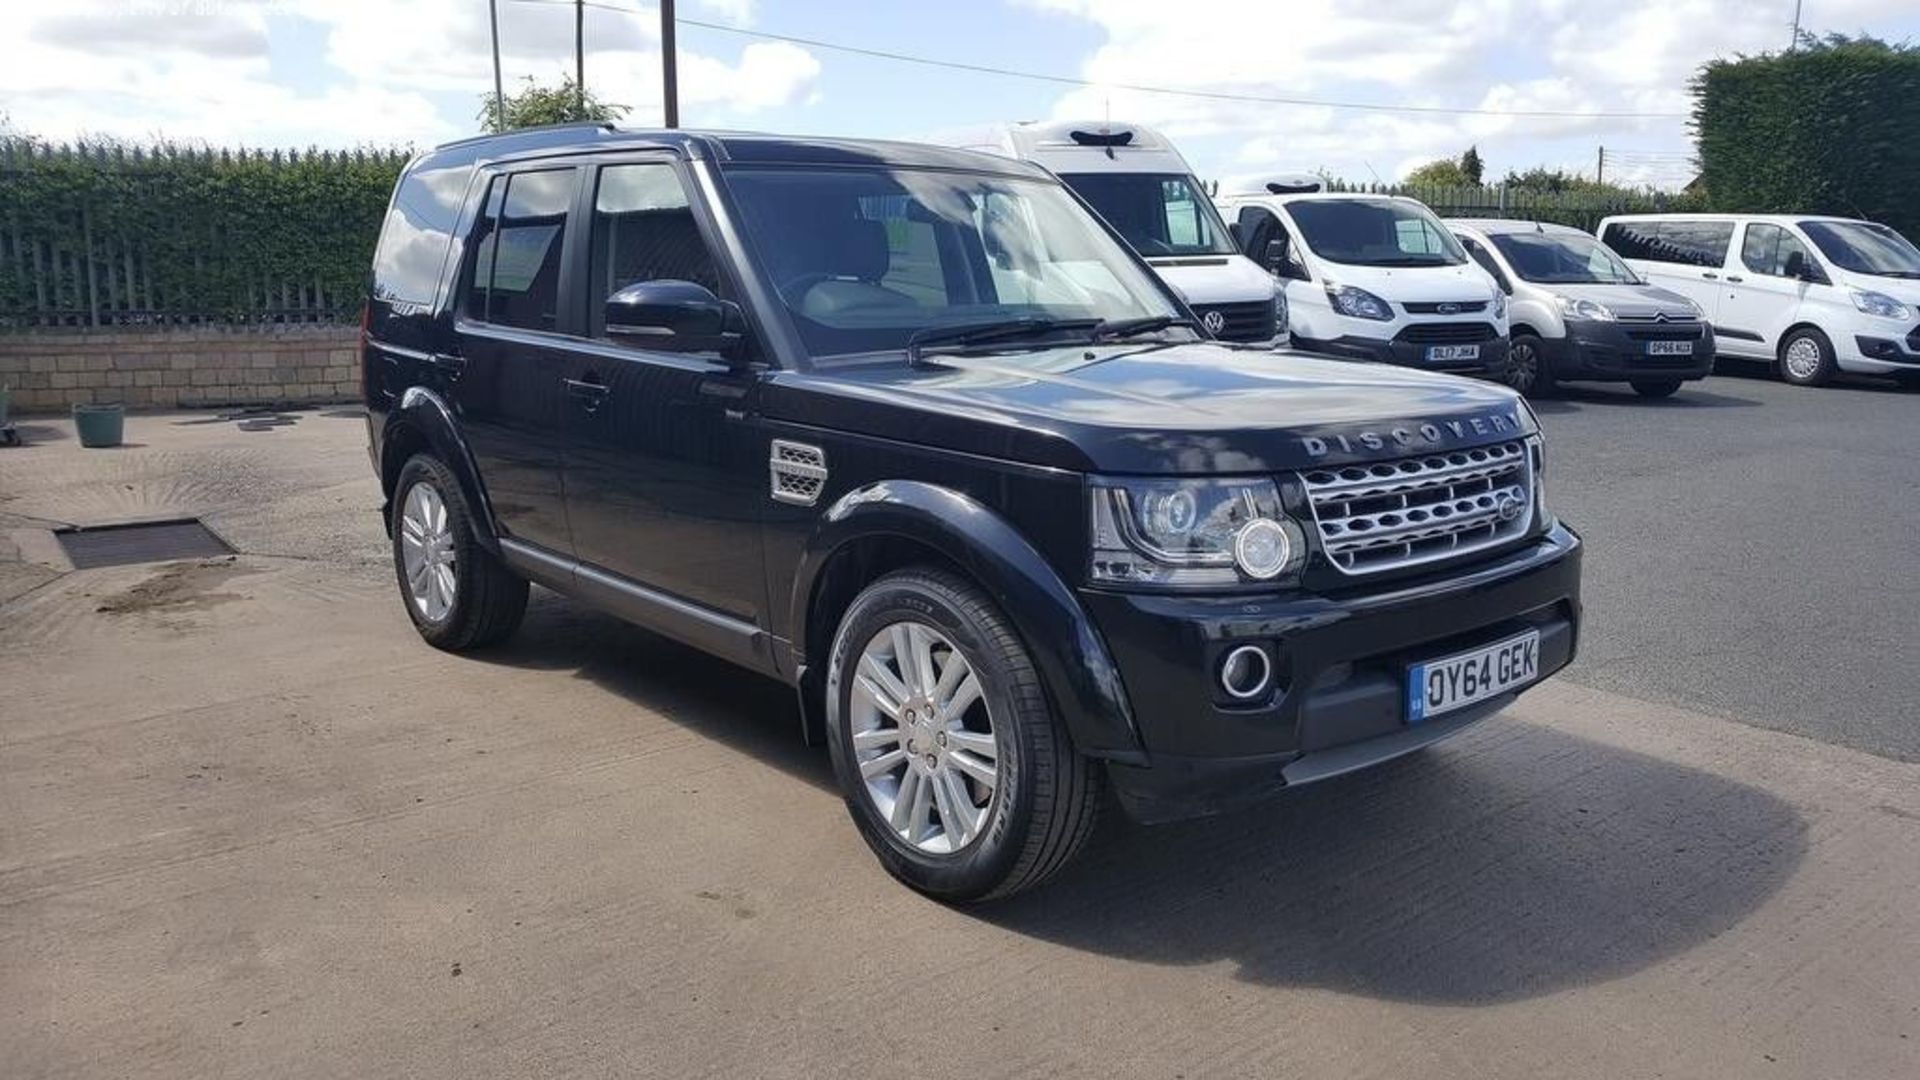 (2014) LANDROVER DISCOVERY 4 3.0L V6HSE APPROX 40k 5 DOOR 7 SEATER MERINA BLACK LEATHER INTERIOR - Image 8 of 8